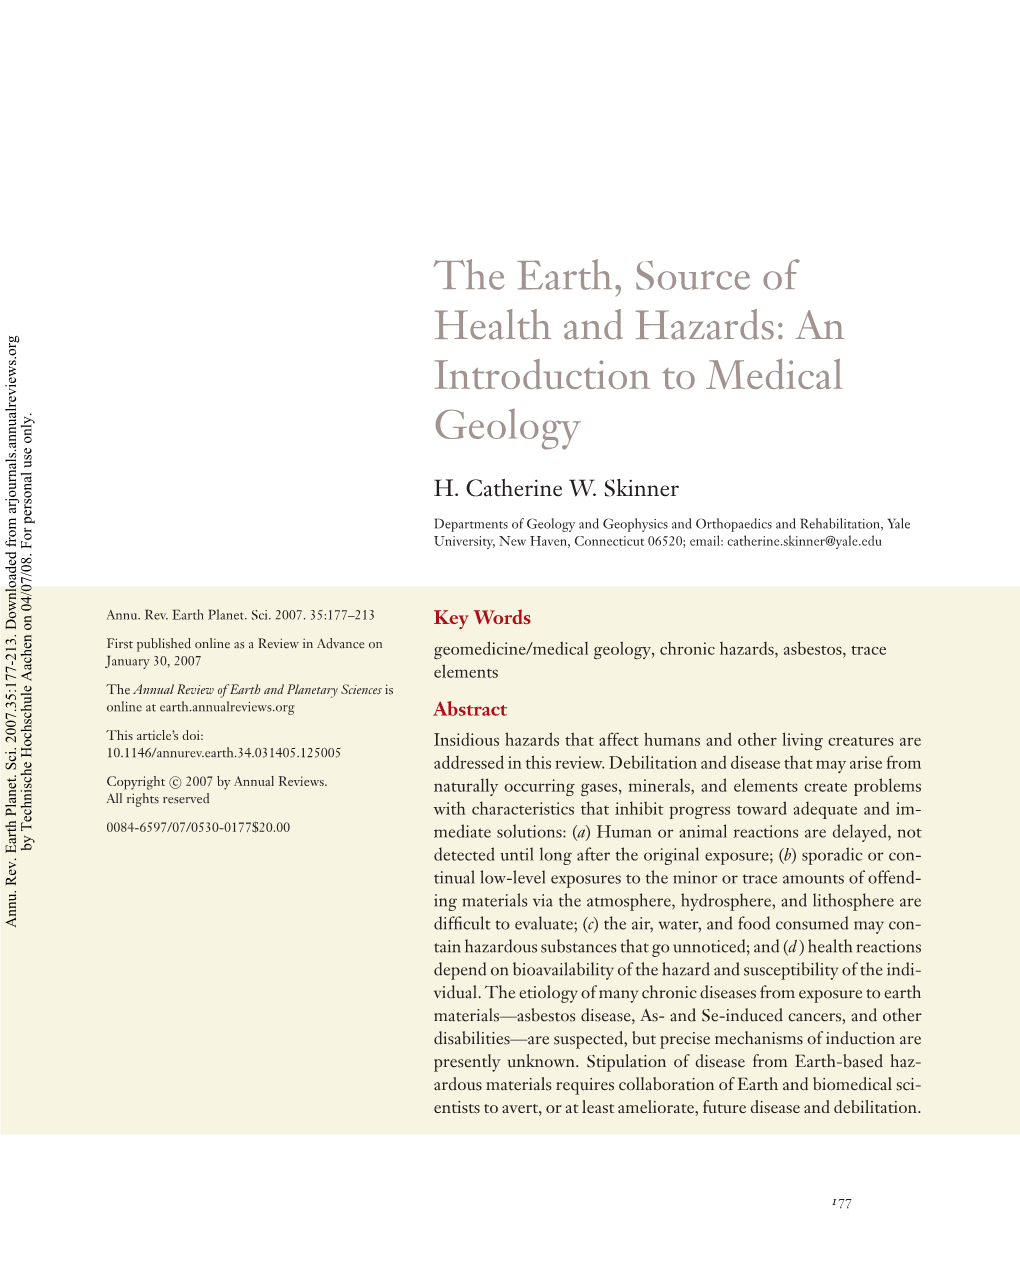 The Earth, Source of Health and Hazards: an Introduction to Medical Geology